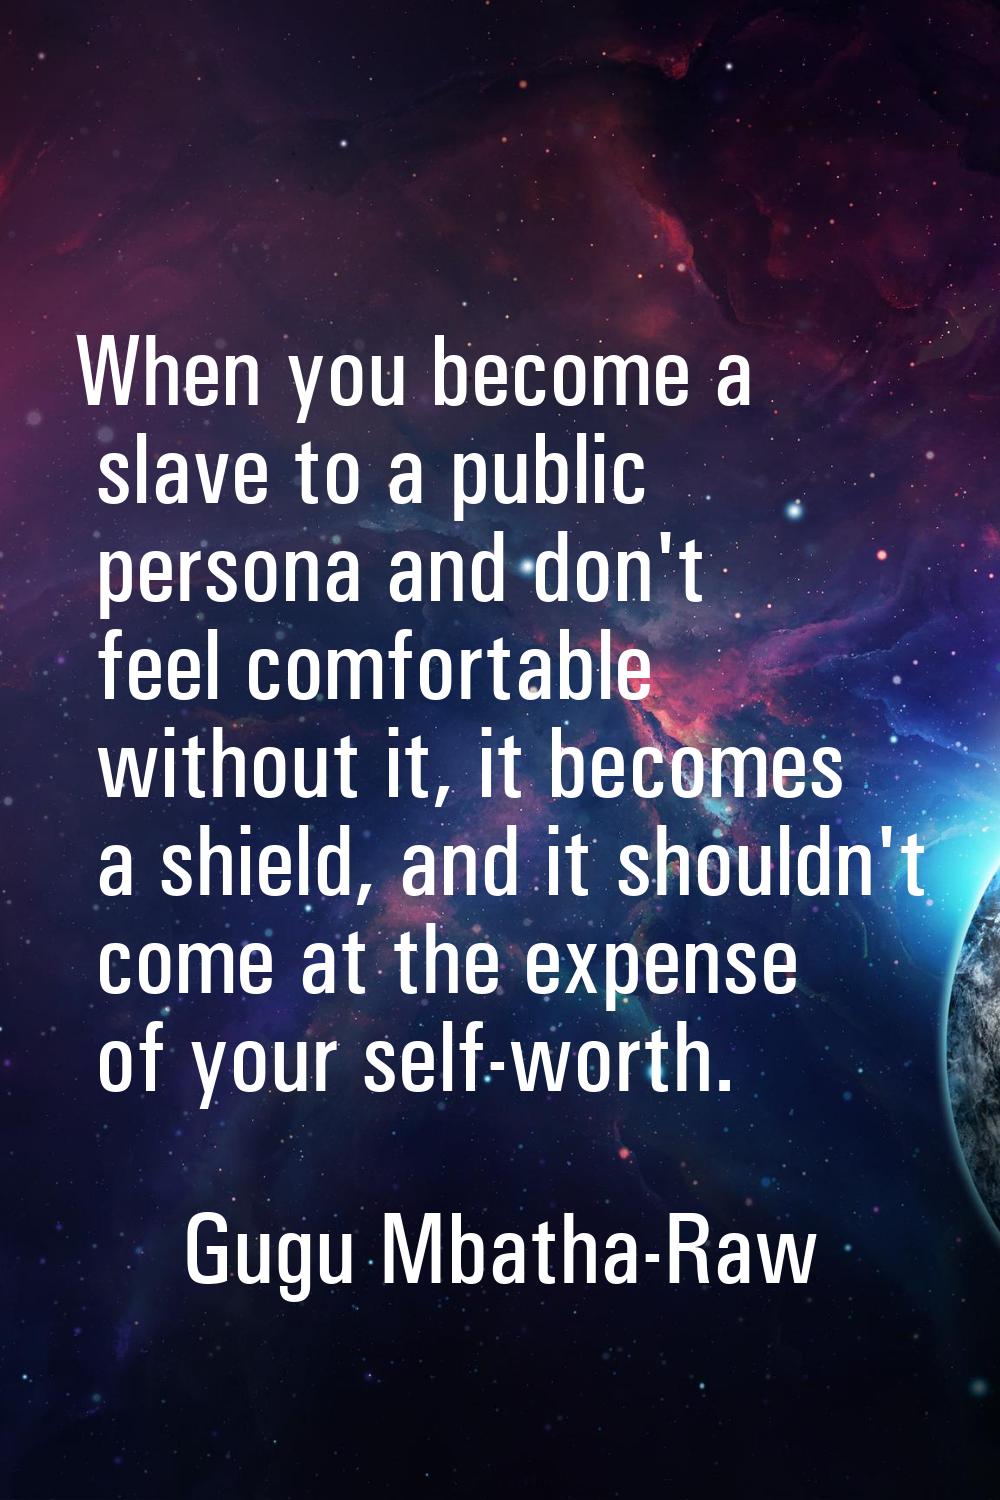 When you become a slave to a public persona and don't feel comfortable without it, it becomes a shi